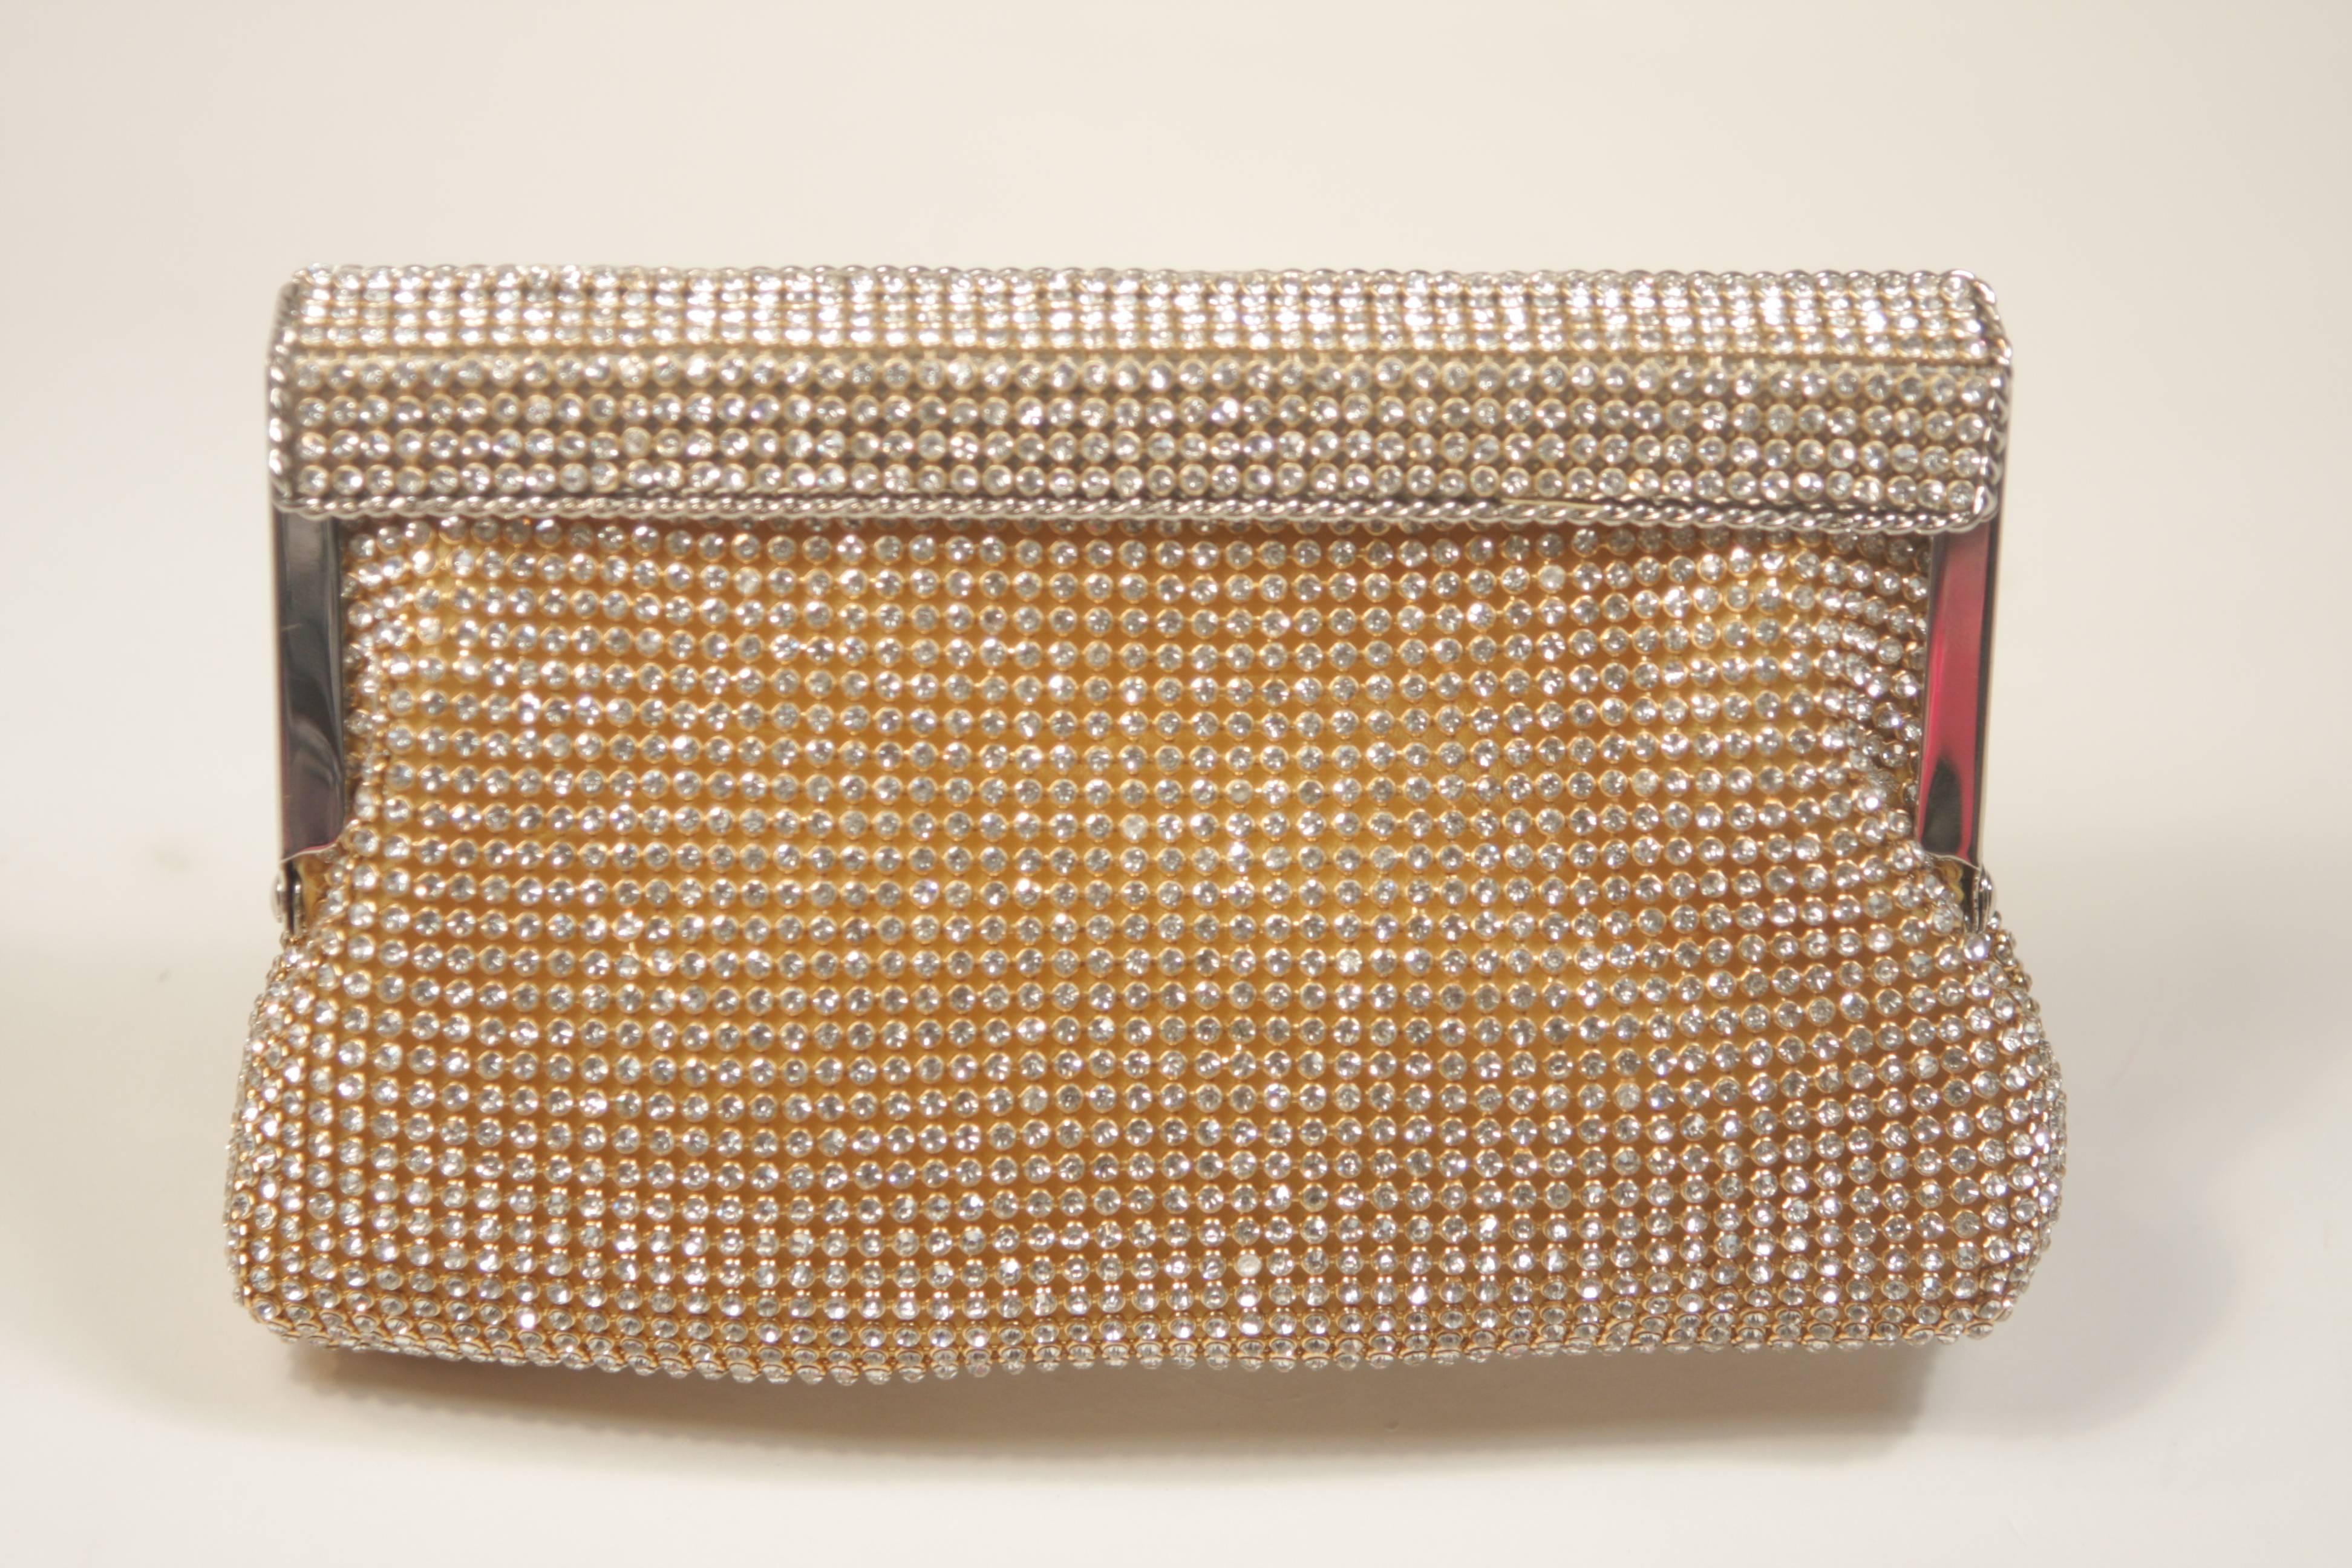  This Elizabeth Mason Couture  rhinestone clutch features a frame style. There is an optional strap. Also available in black as well. In new or unused condition.

  **Please cross-reference measurements for personal accuracy. 

Measurements